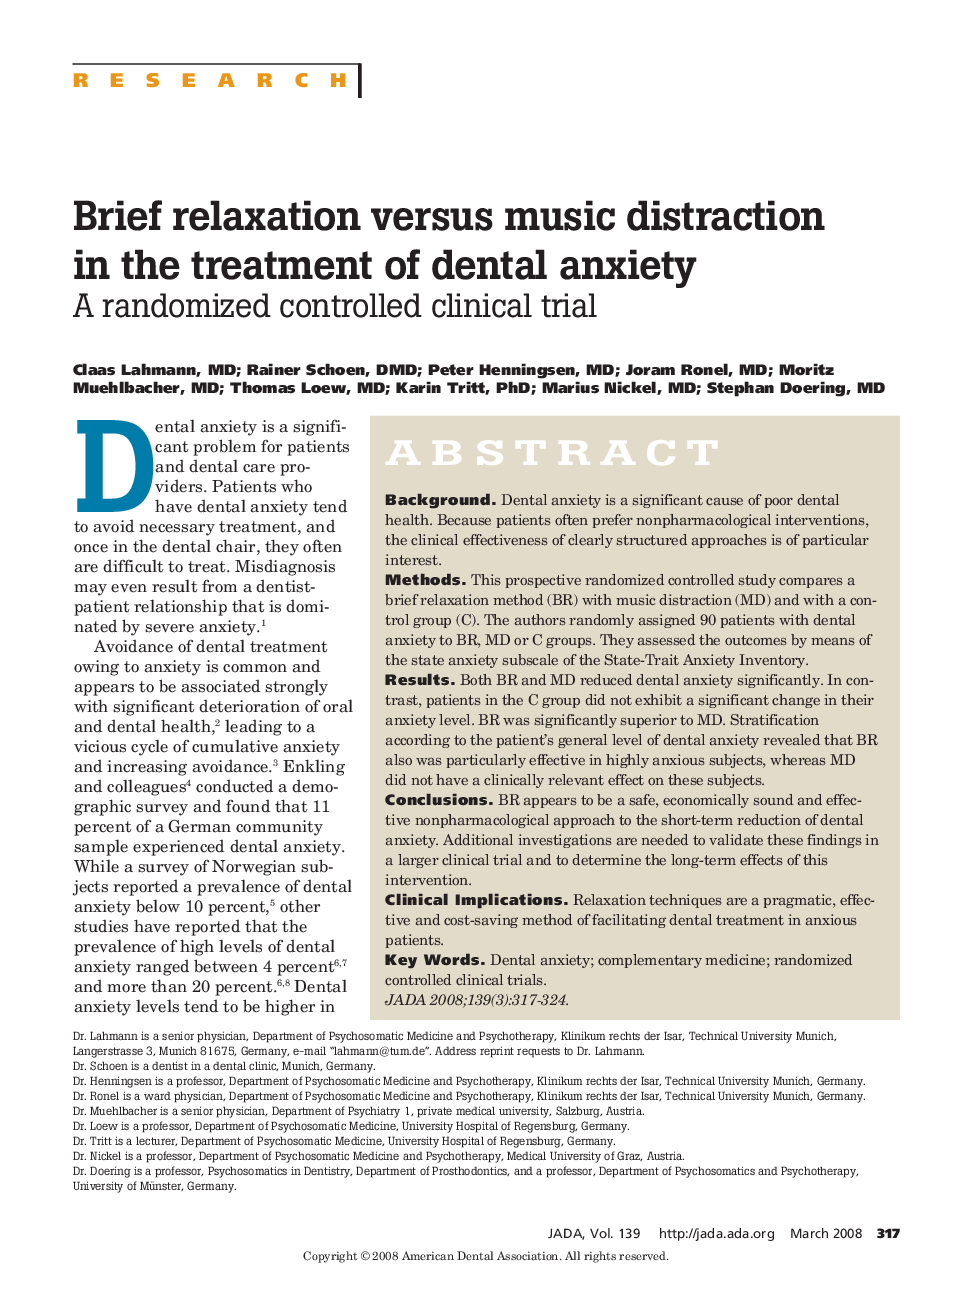 Brief Relaxation Versus Music Distraction in the Treatment of Dental Anxiety : A Randomized Controlled Clinical Trial